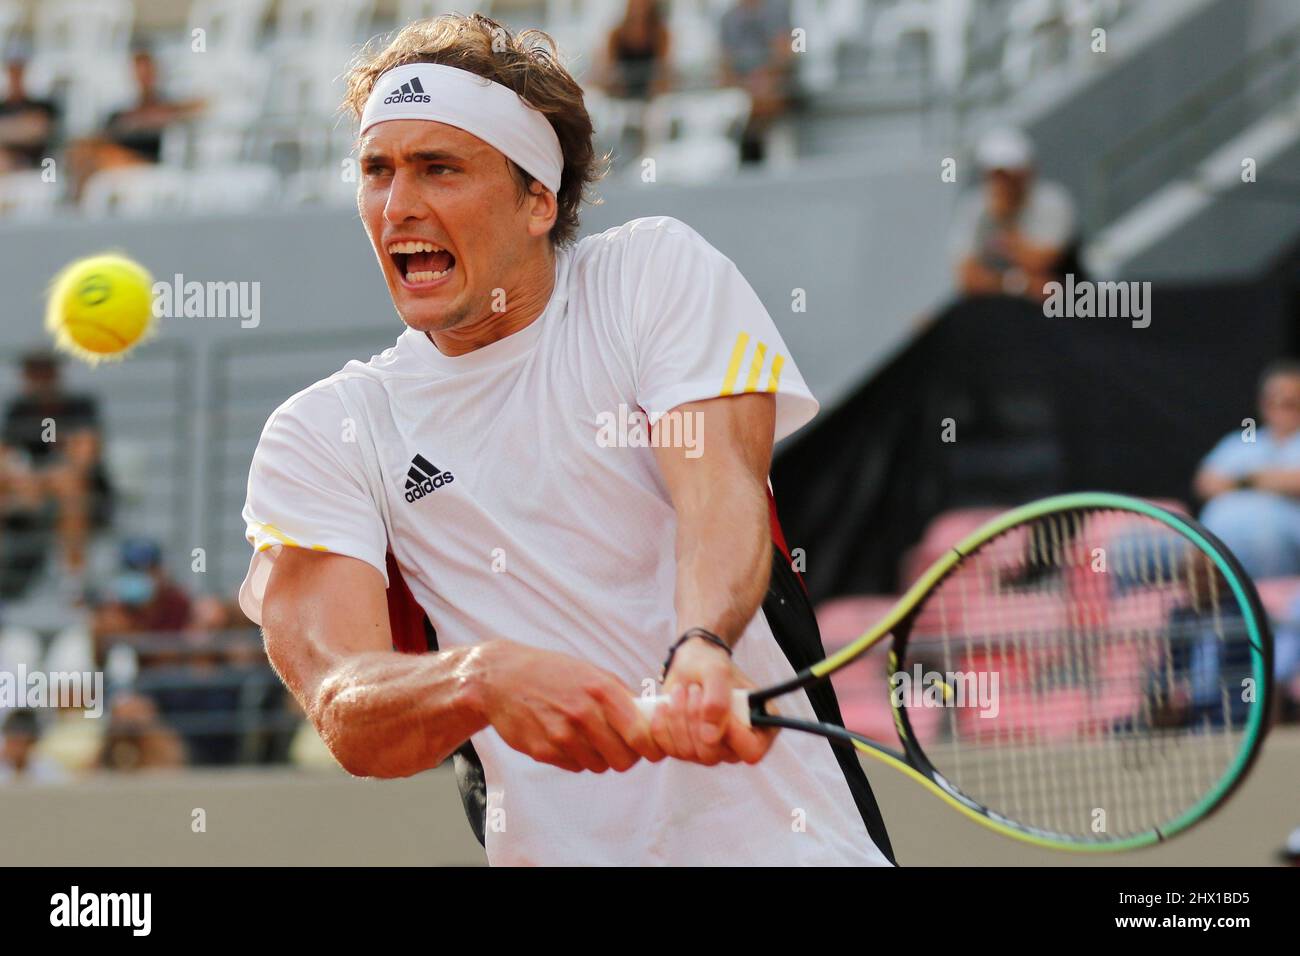 Alexander Zverev tennis player of Germany at Davis Cup Qualifiers versus Brazil at the Olympic Park - Rio de Janeiro, Brazil 03.04.2022 Stock Photo